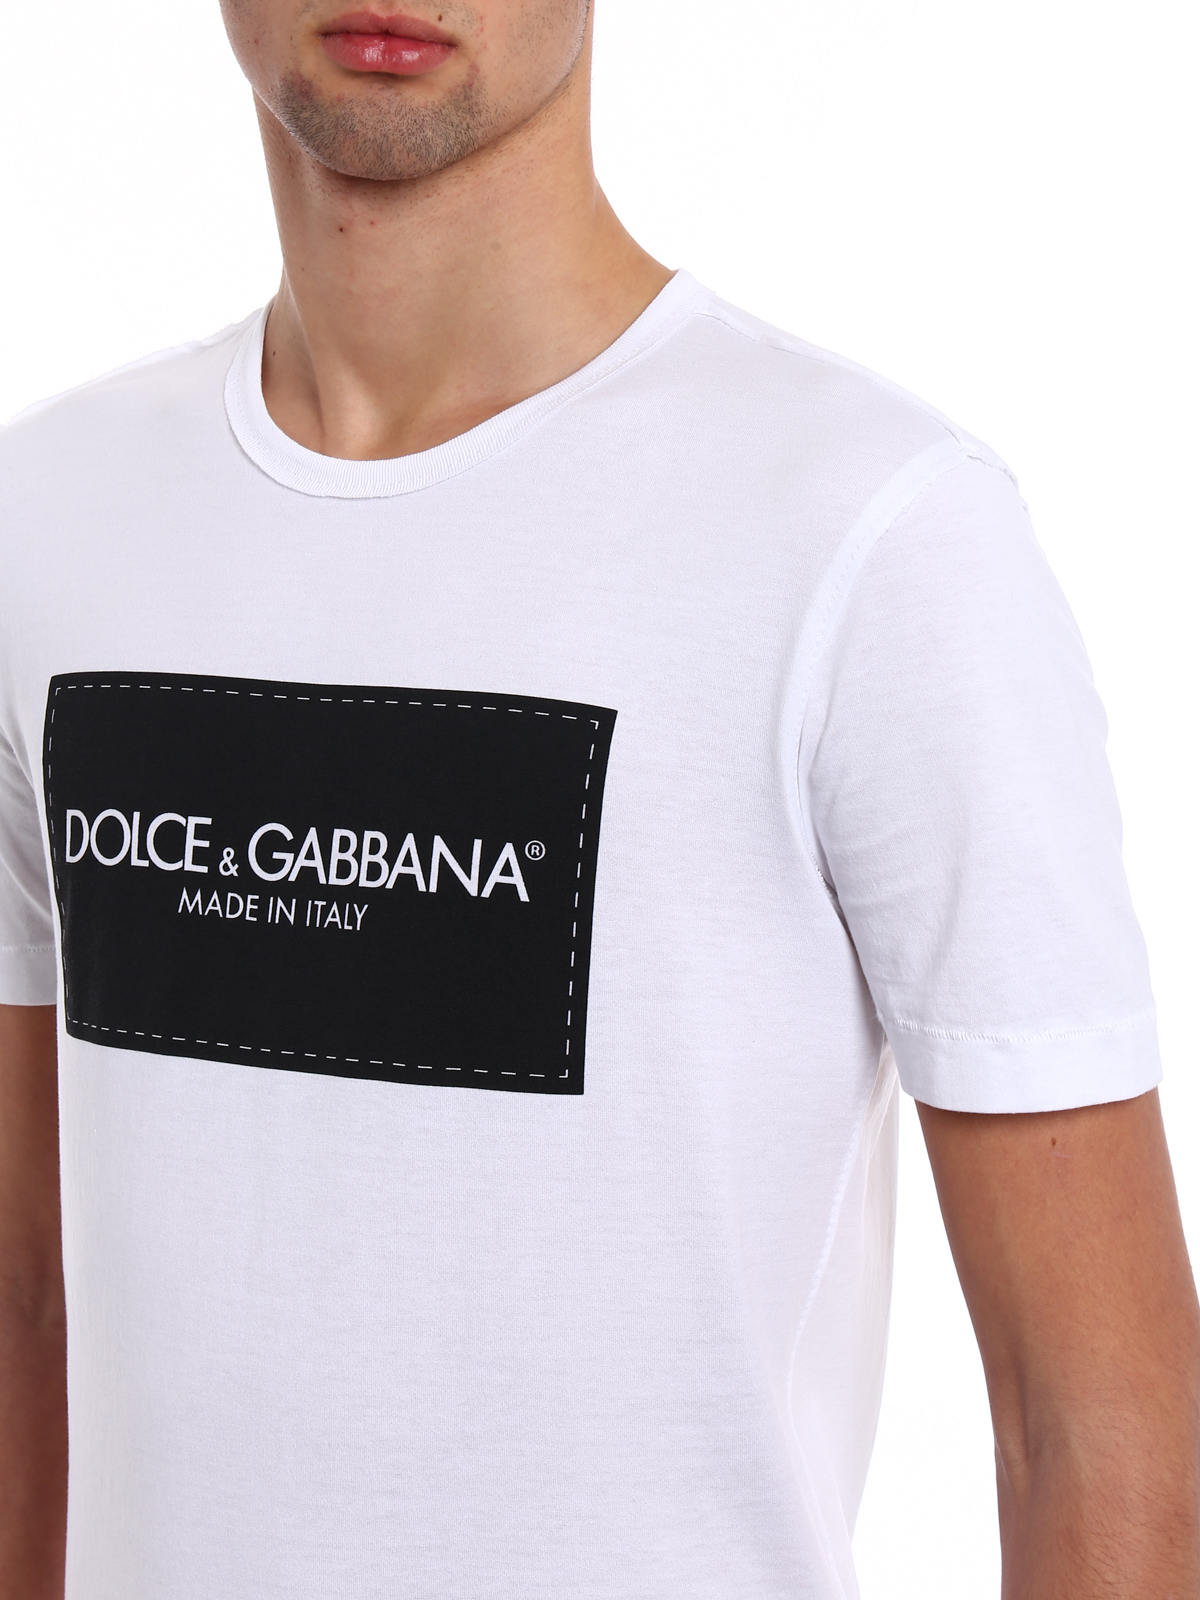 dolce and gabbana label